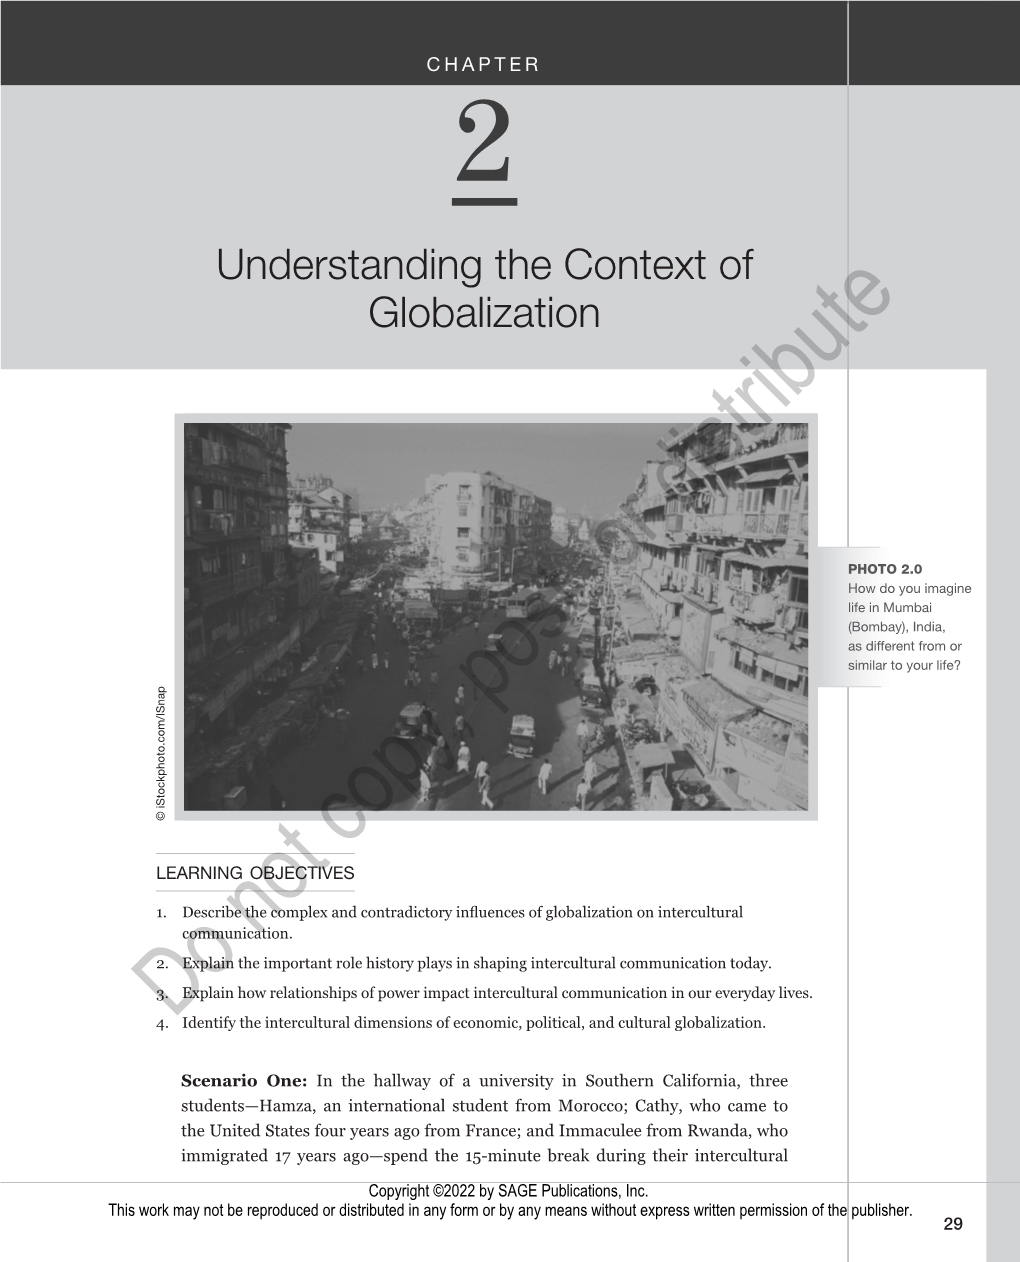 Chapter 2: Understanding the Context of Globalization